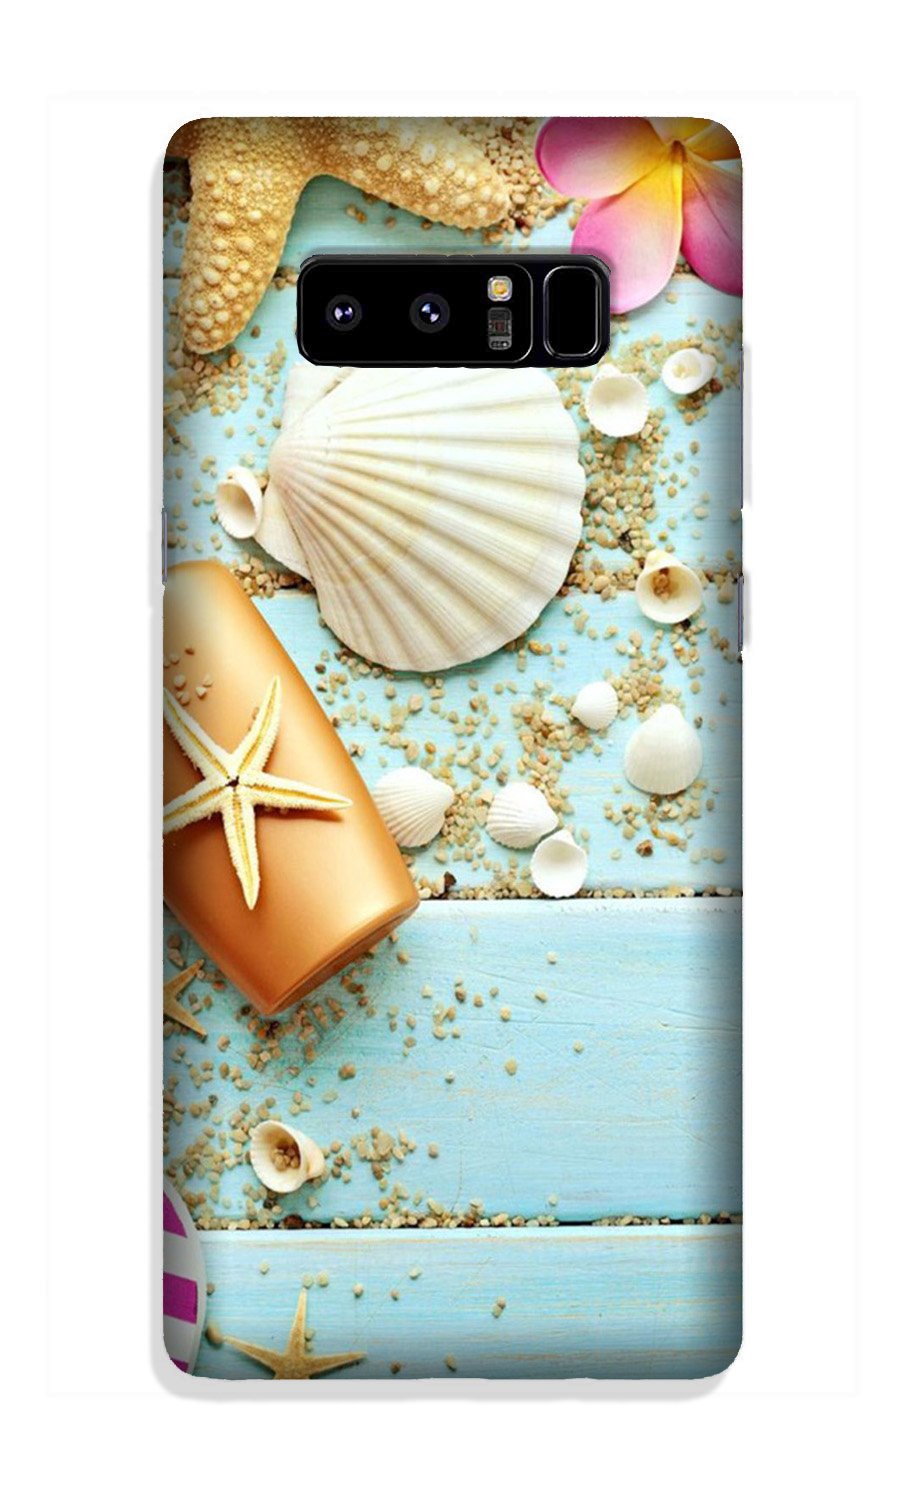 Sea Shells Case for Galaxy Note 8